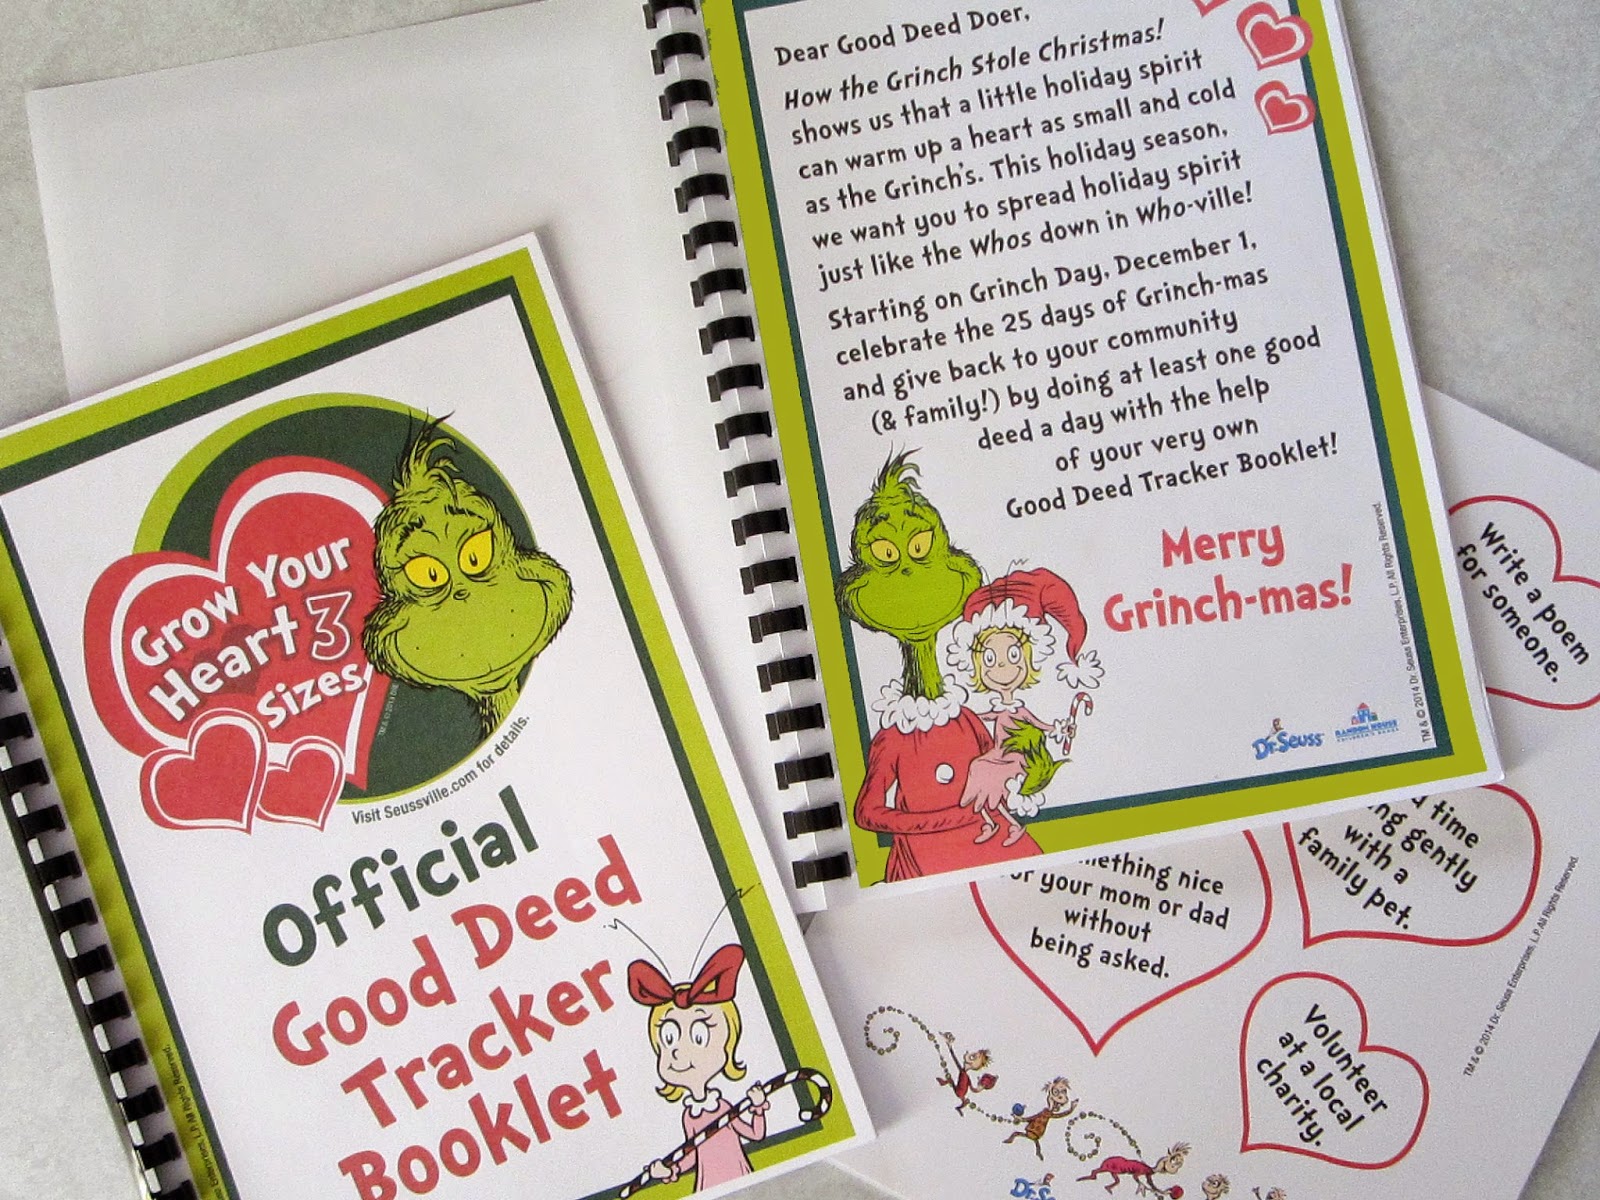 13 The Grinch ideas  grinch, grinch party, christmas classroom